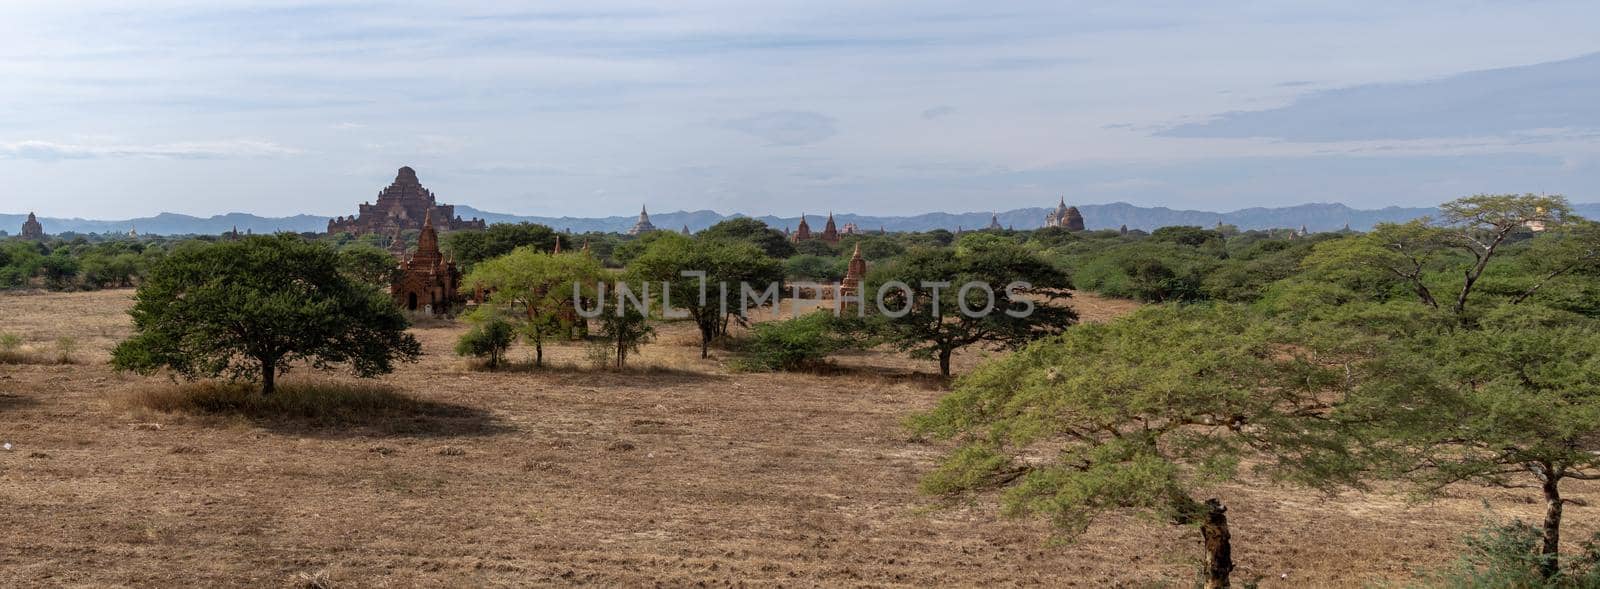 Several temples in the distance from an open dry grass field by arvidnorberg